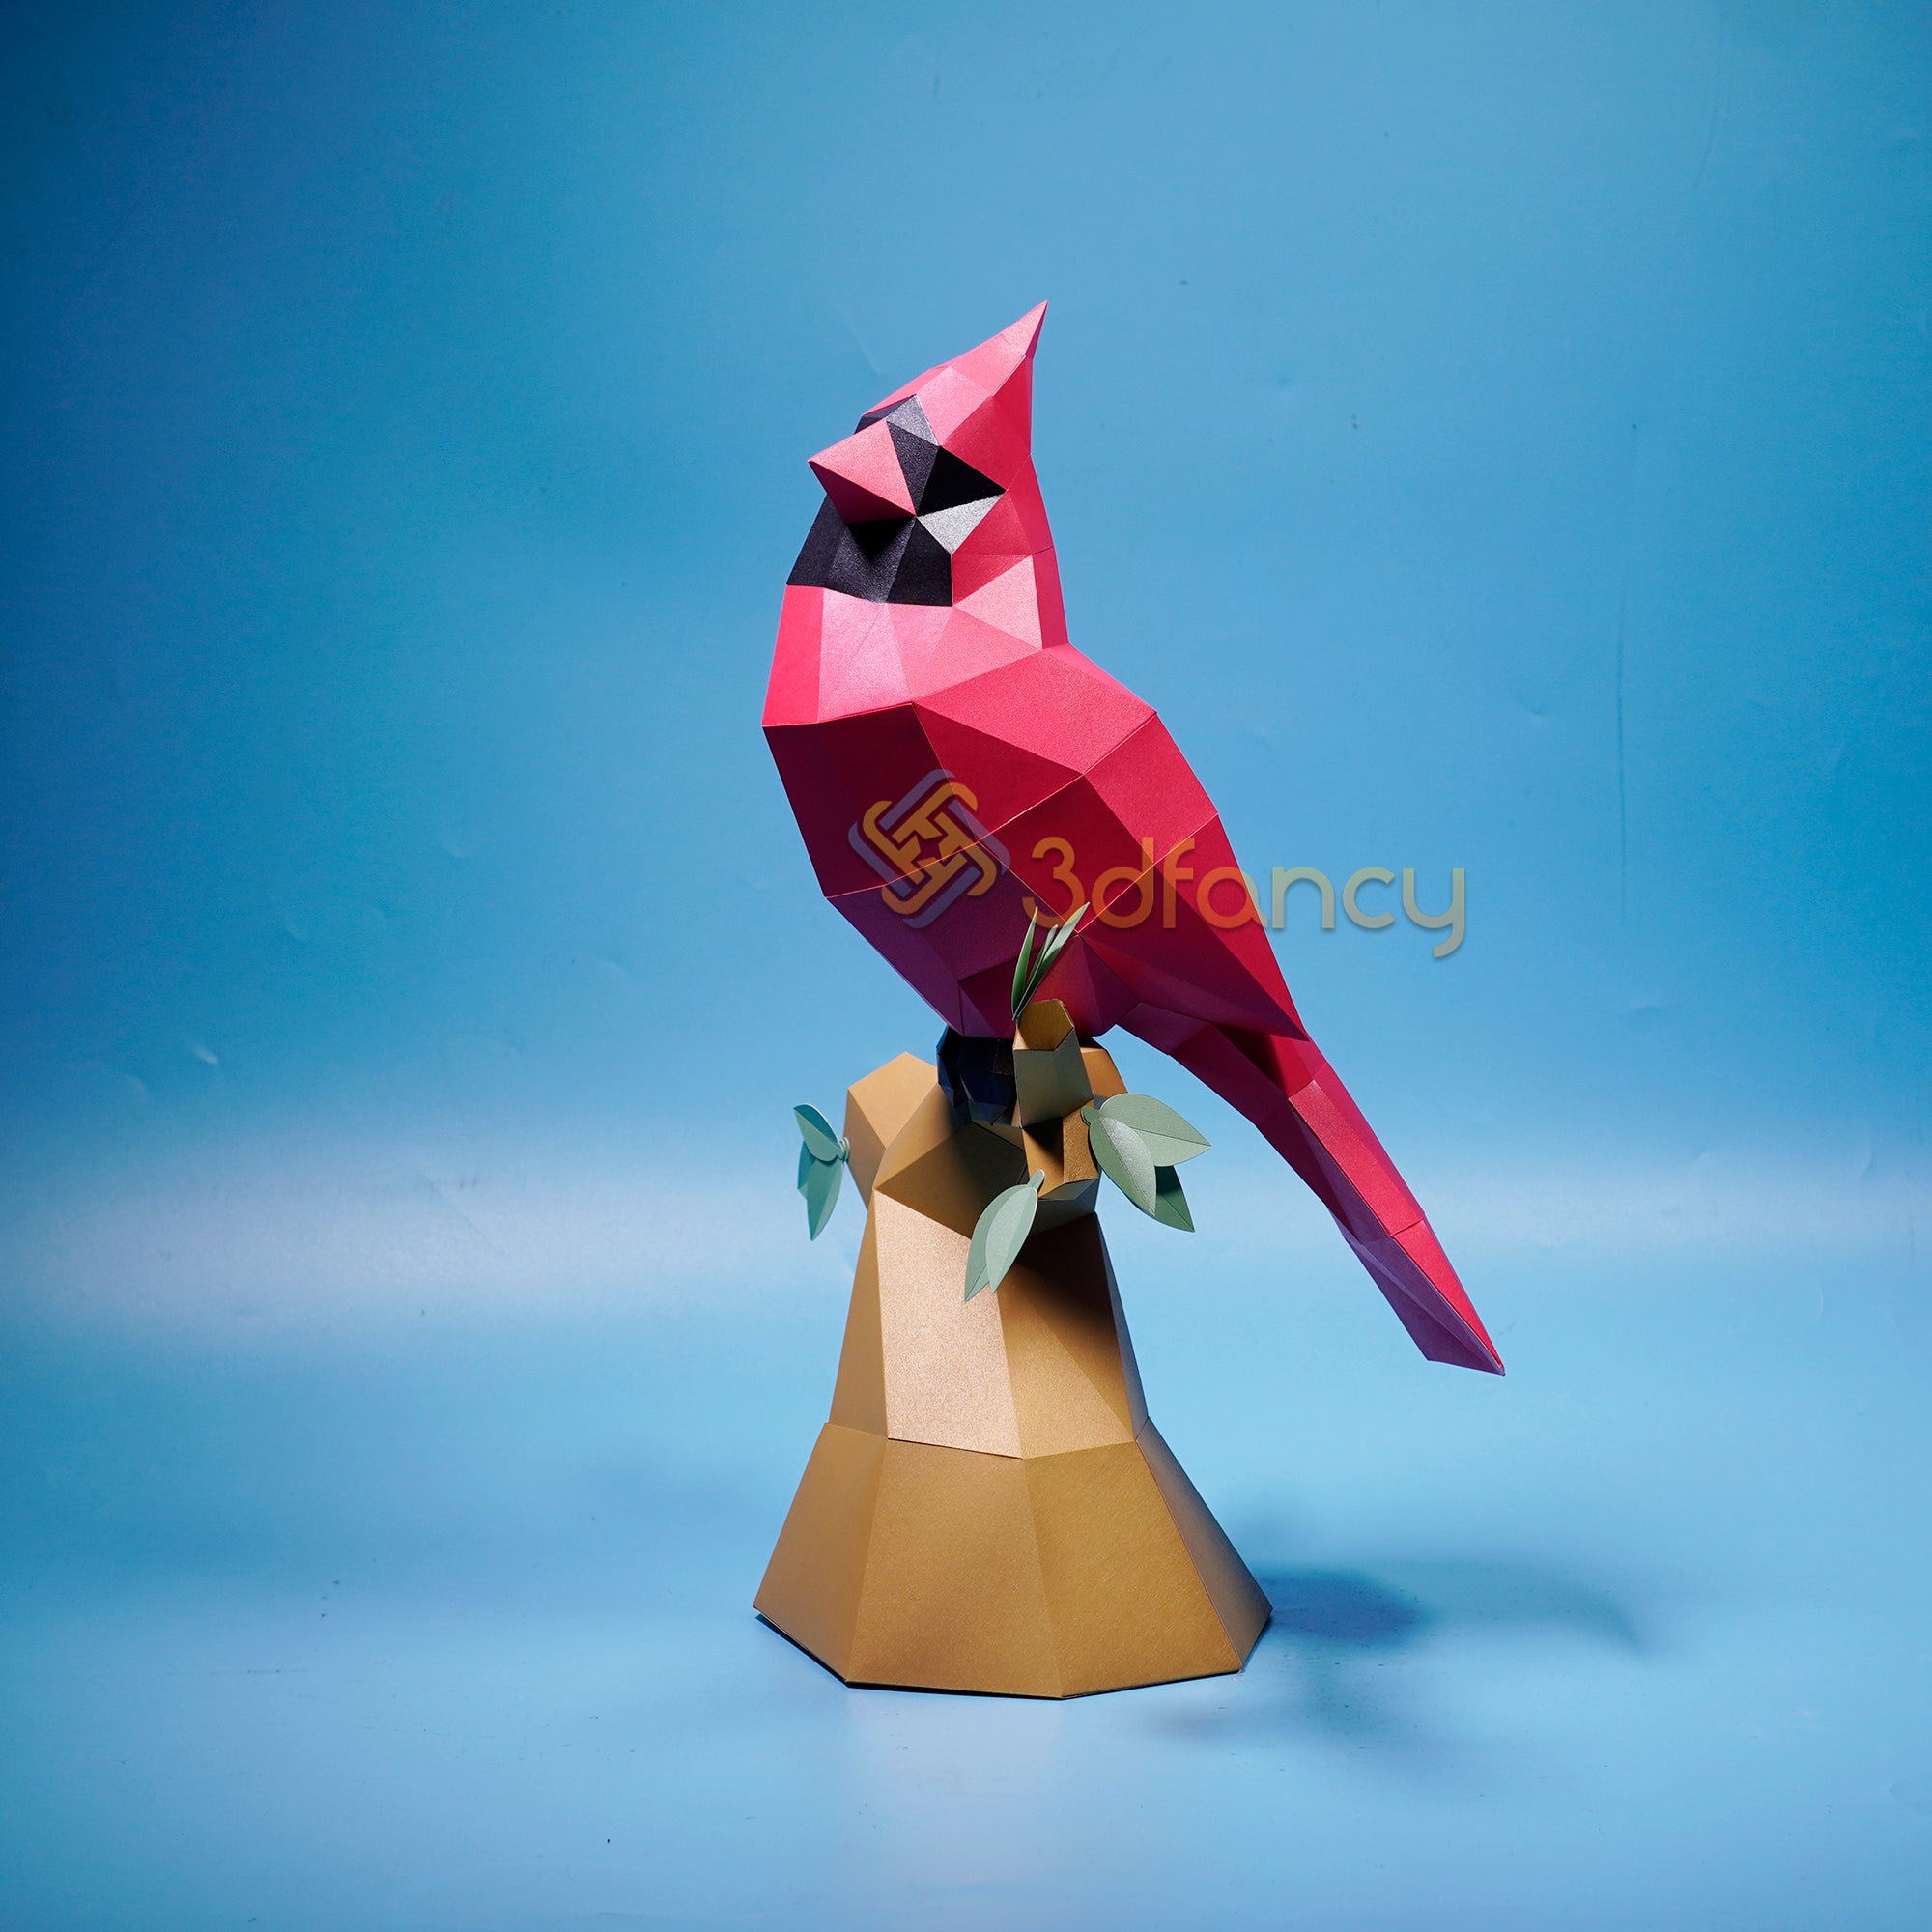 Cardinal Bird Papercraft PDF for Printer, SVG for Cricut Projects - DIY Low Poly Red Bird Paper Sculpture for Christmas Decoration